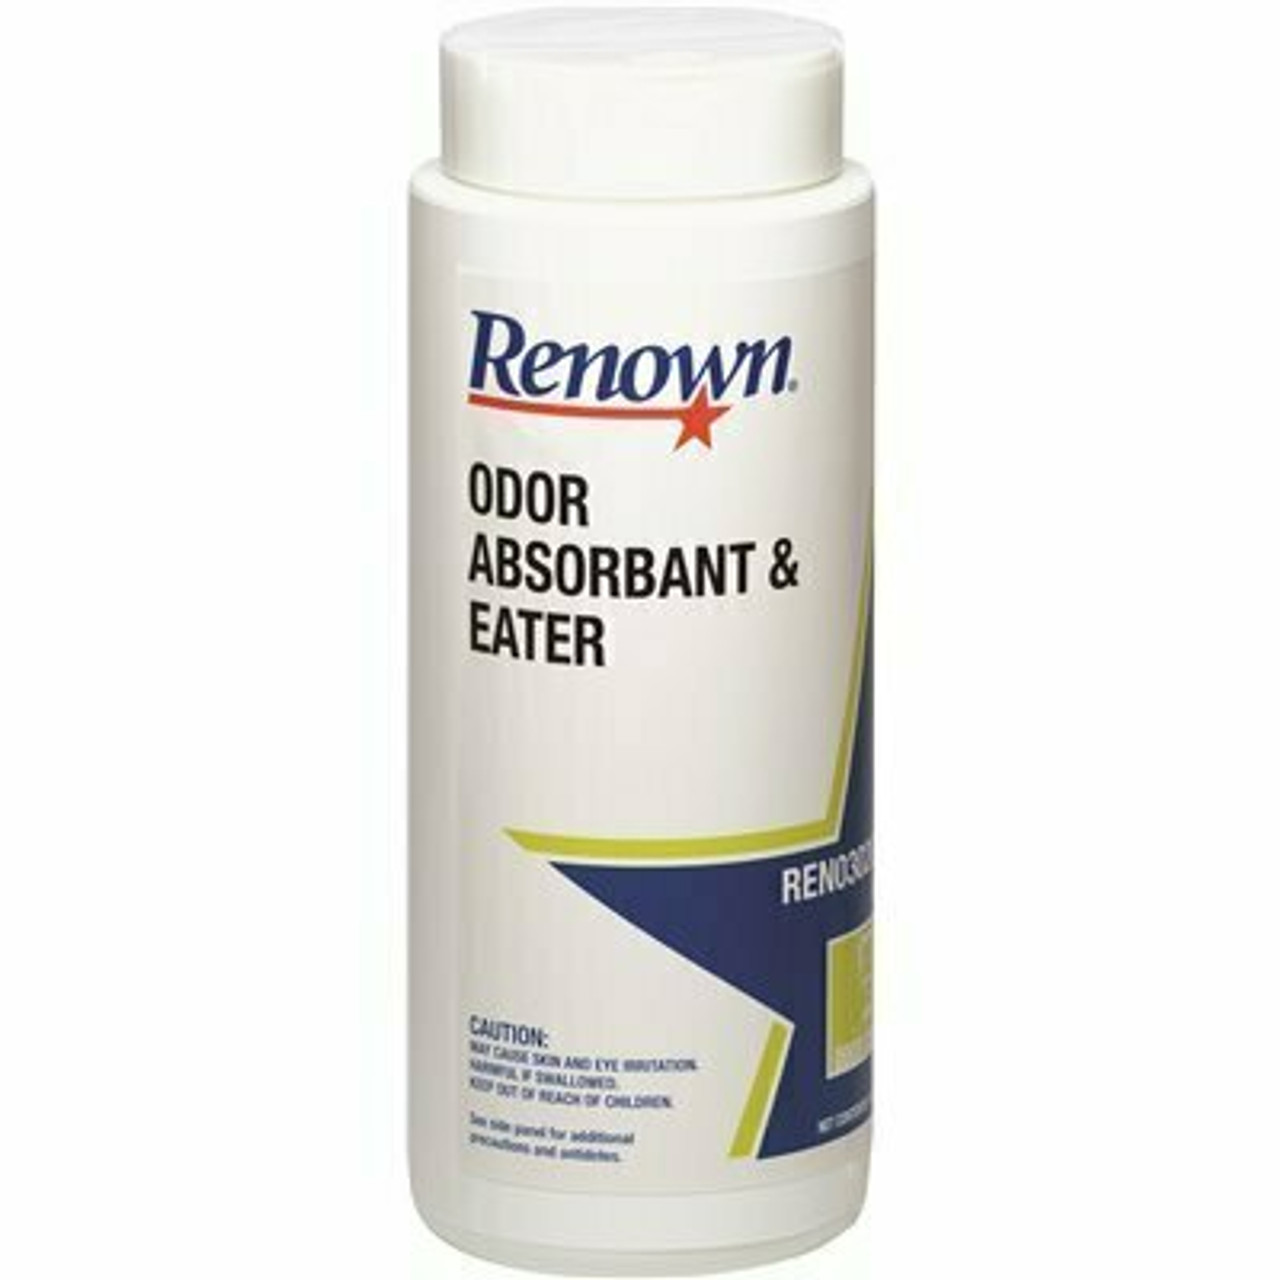 Renown 1 Lb. Odor Absorbent And Eater (6 Per Case)